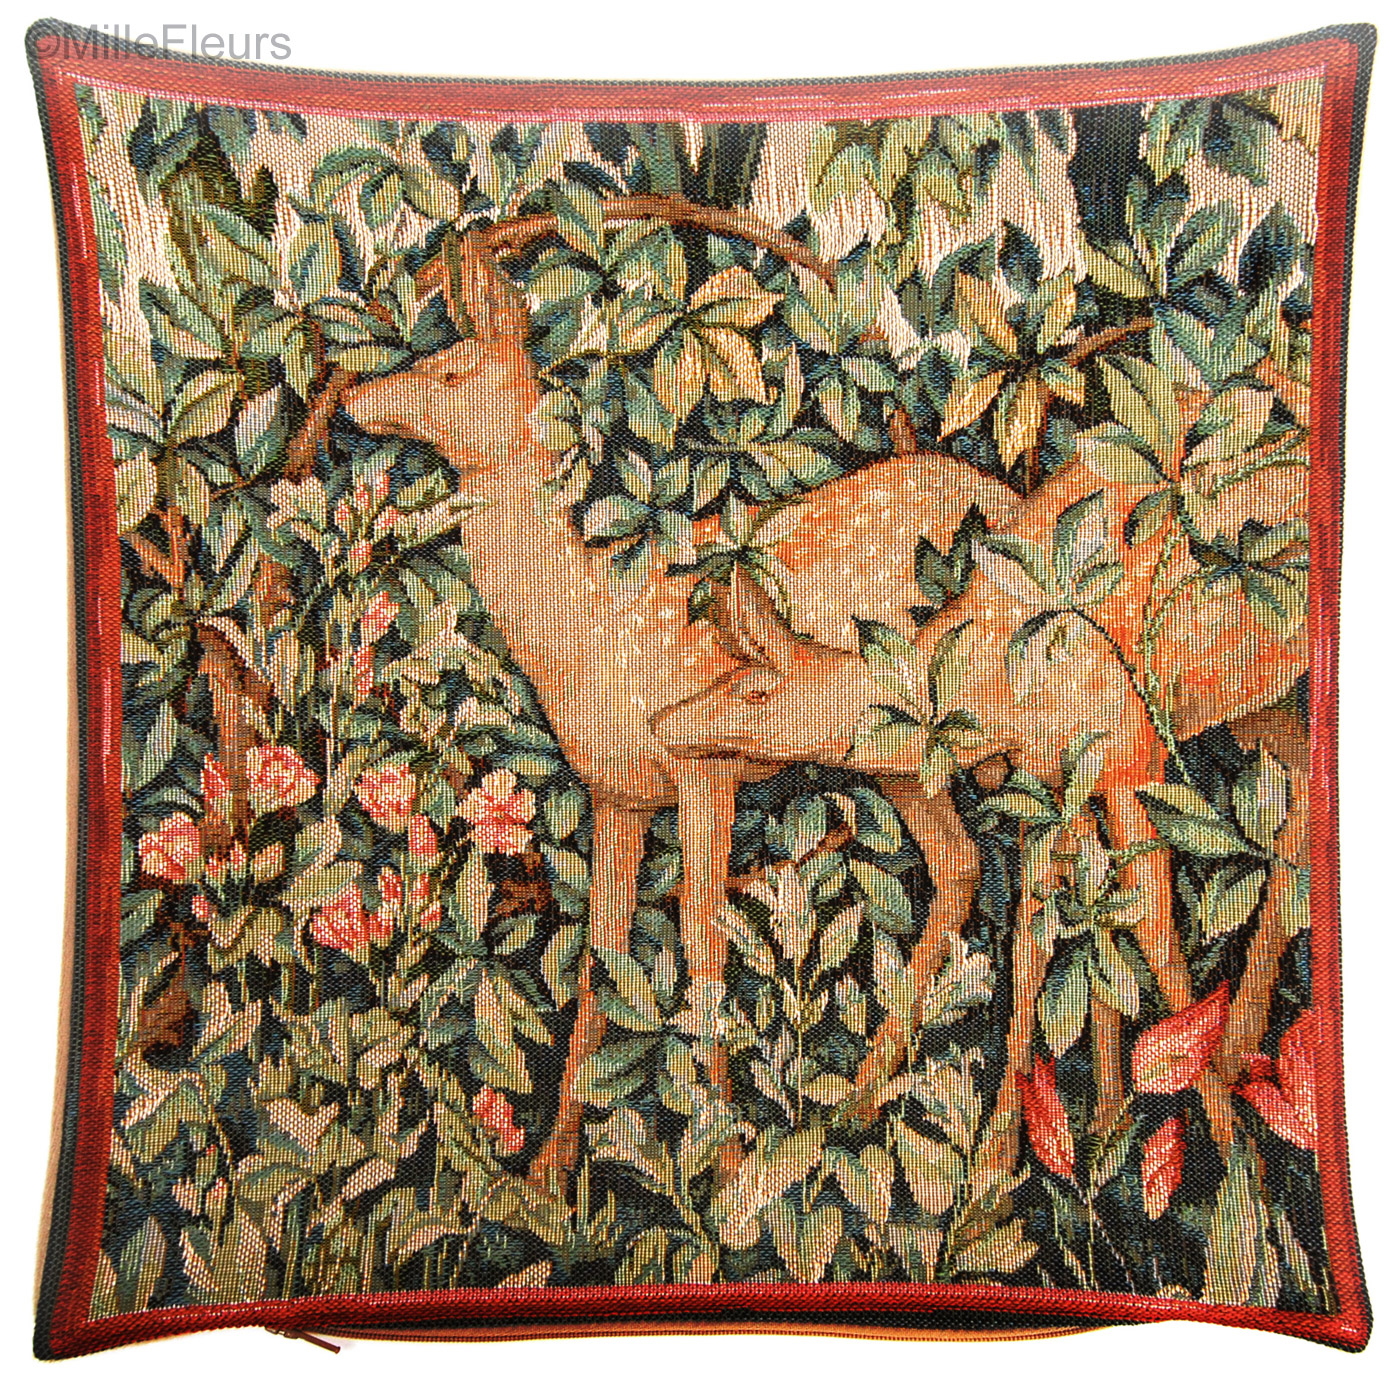 Two Deer - William Morris & Co - Tapestry cushions - Mille Fleurs ...